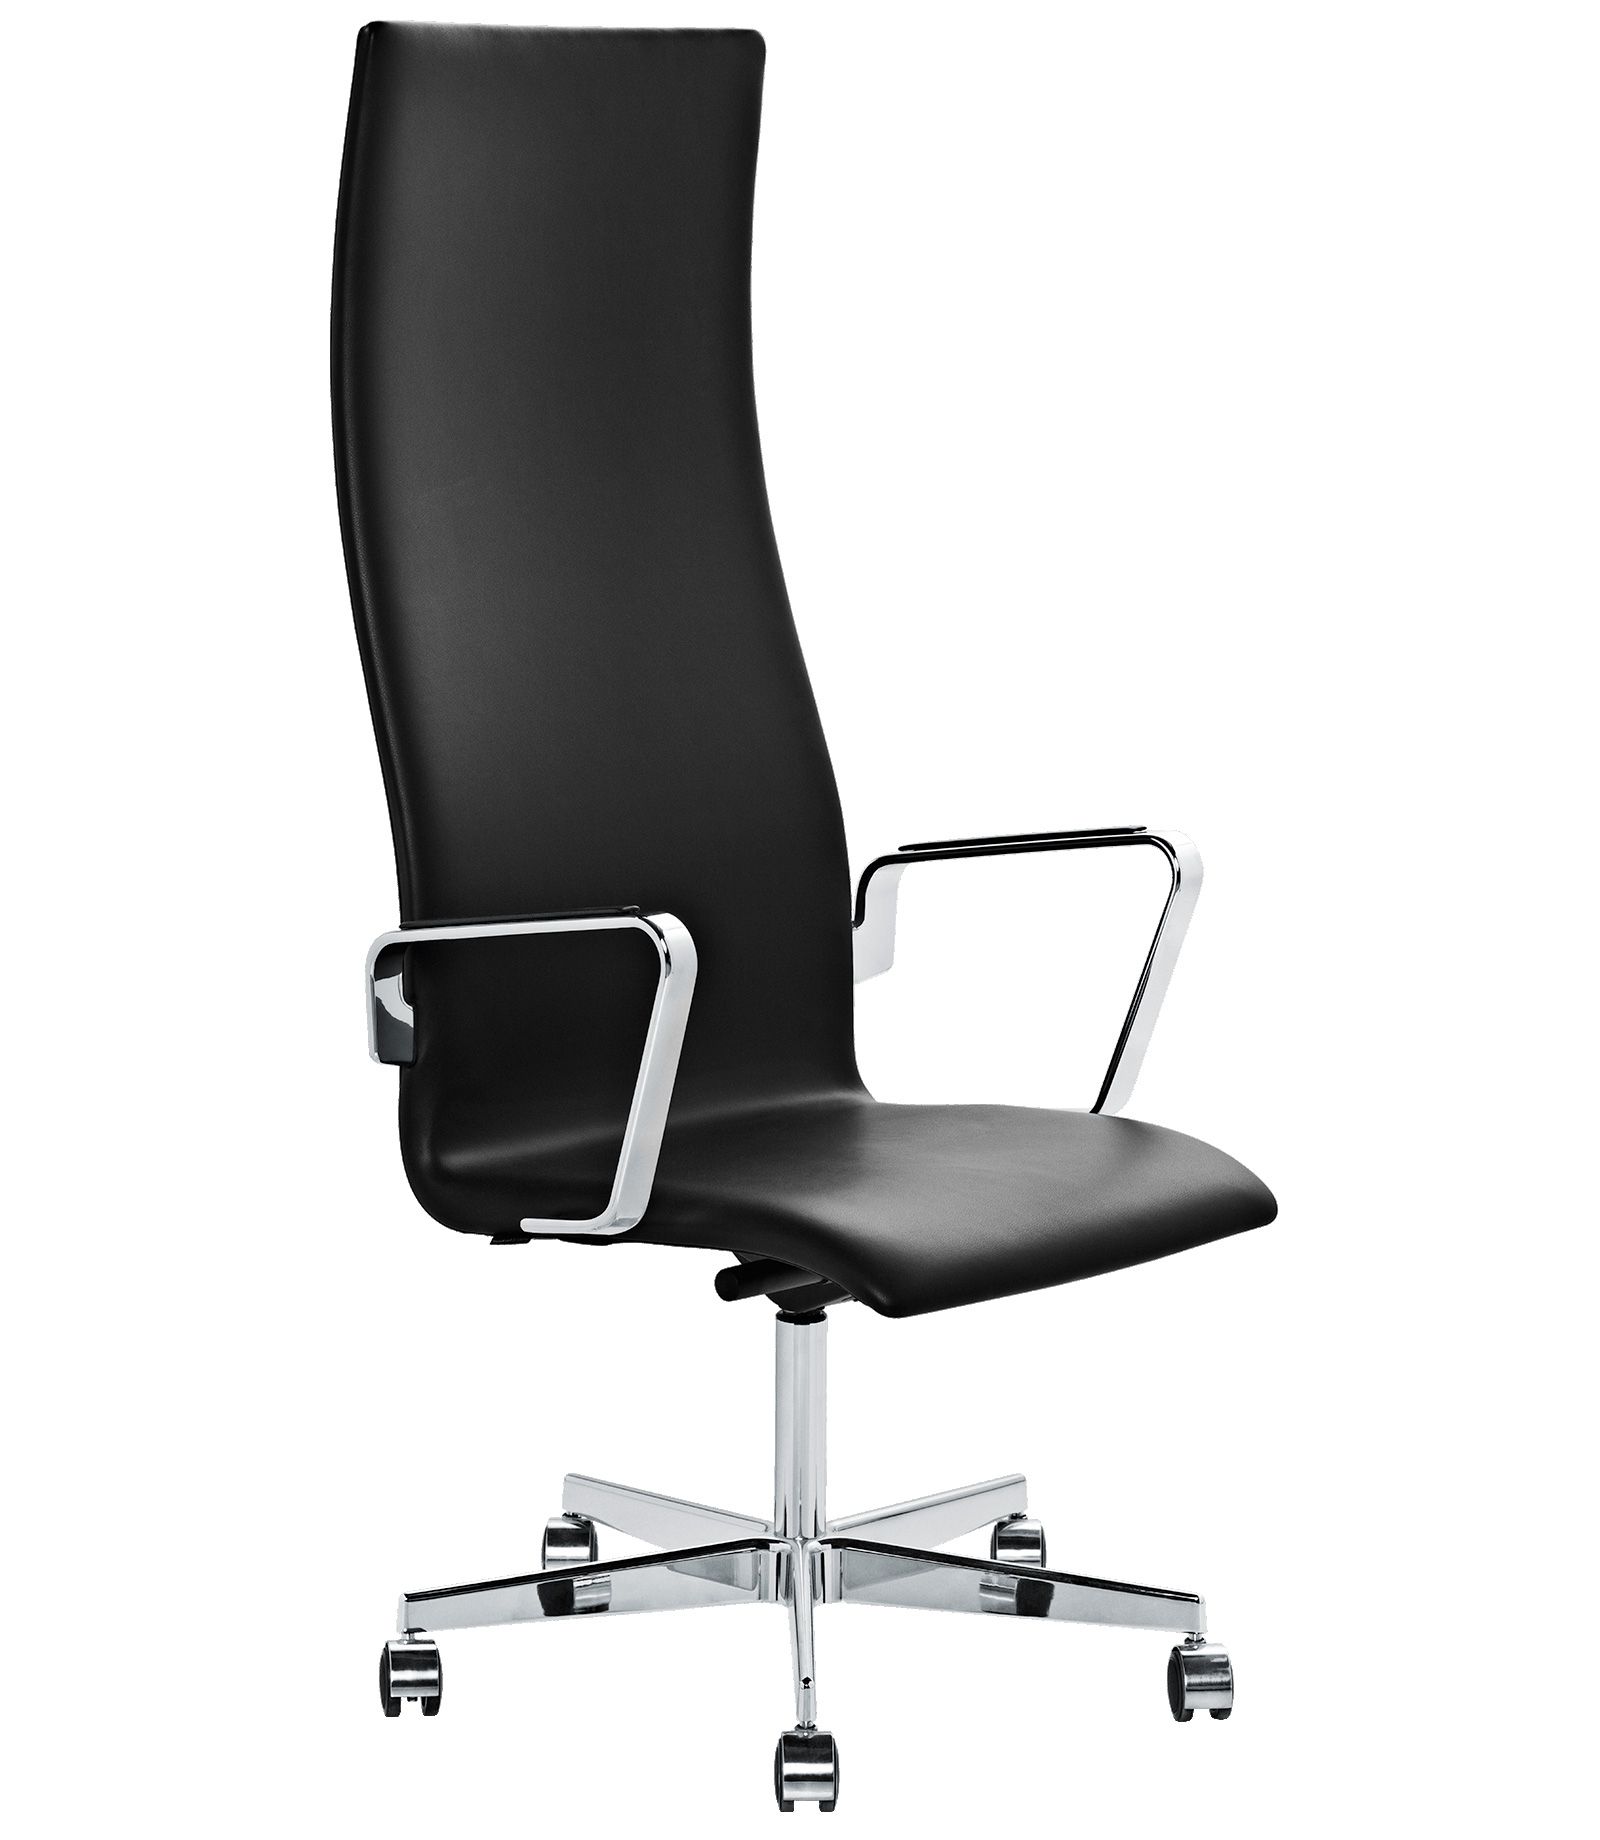 Most Expensive Executive Office Chair | Sante Blog